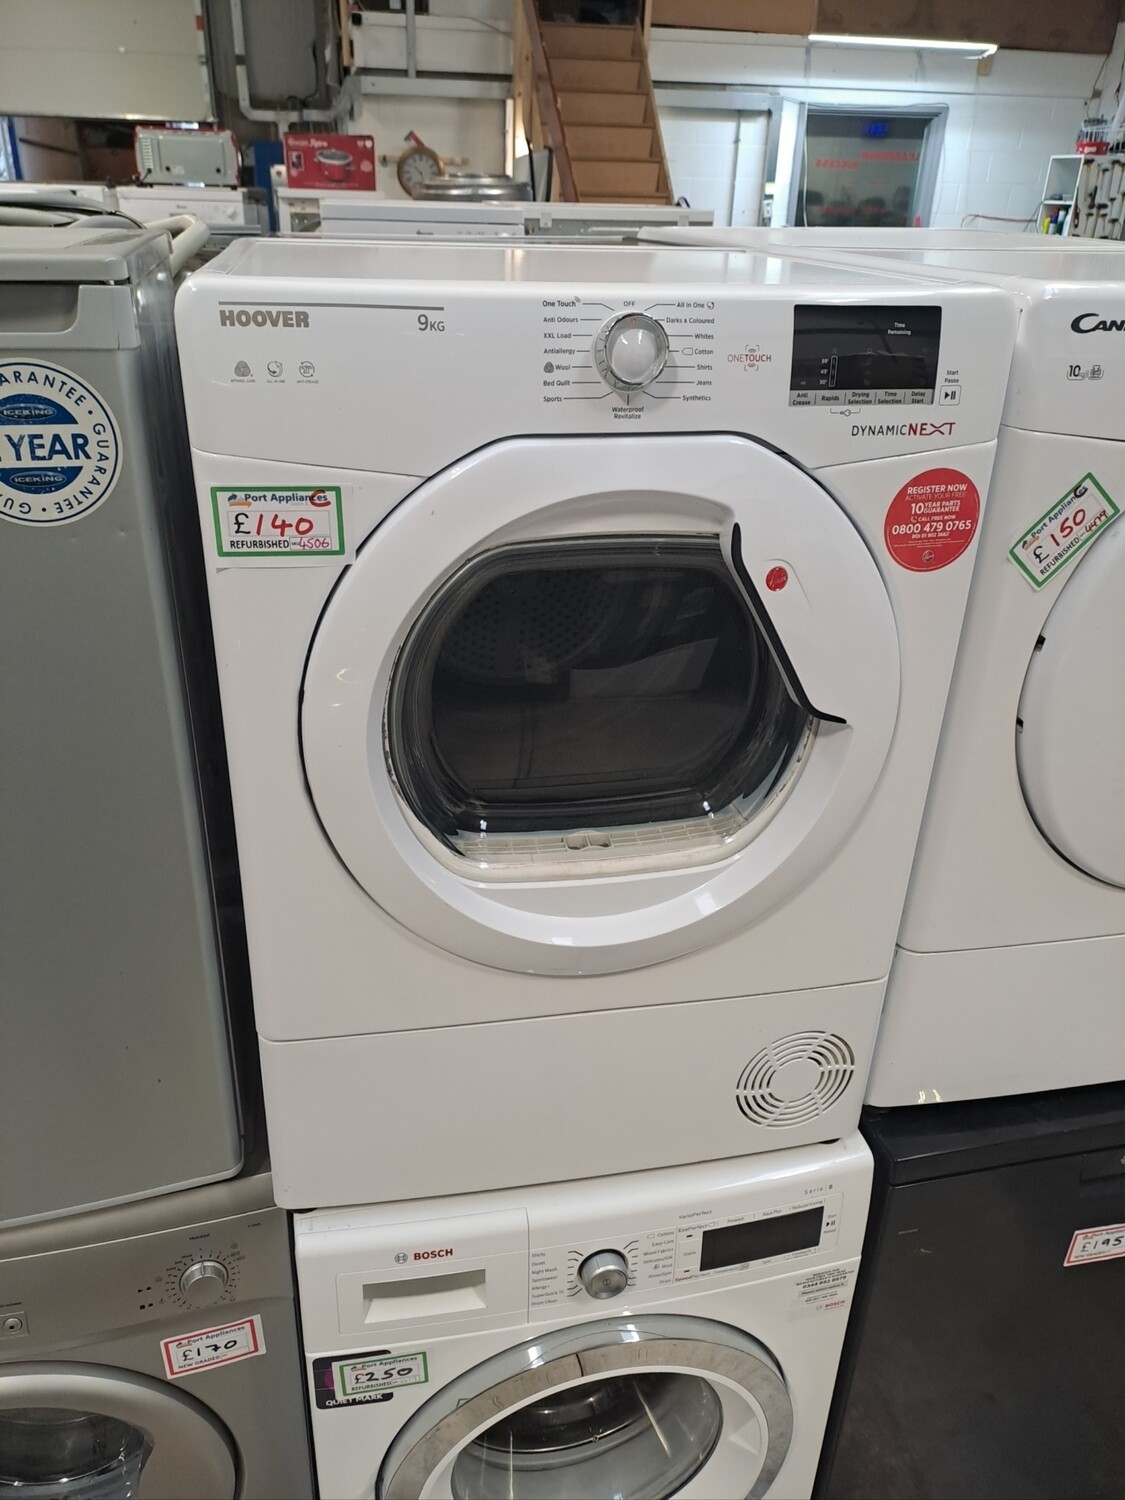 Hoover DXC9DG80 9kg Condenser Dryer White Refurbished 6 Months Guarantee. This item is Located in our Whitby Road Shop